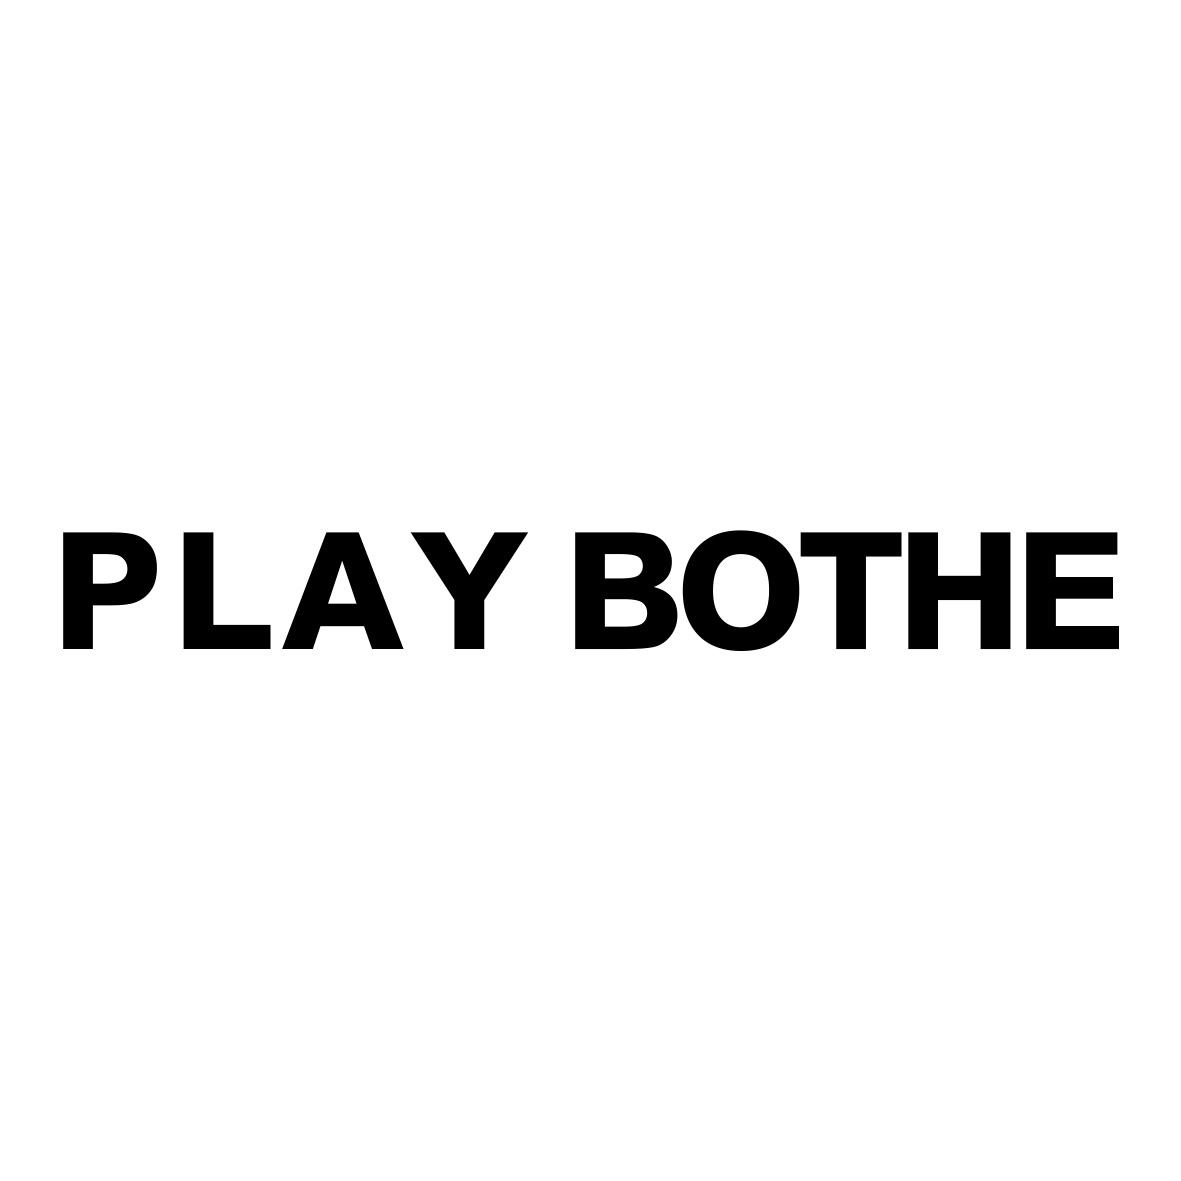 PLAY BOTHE